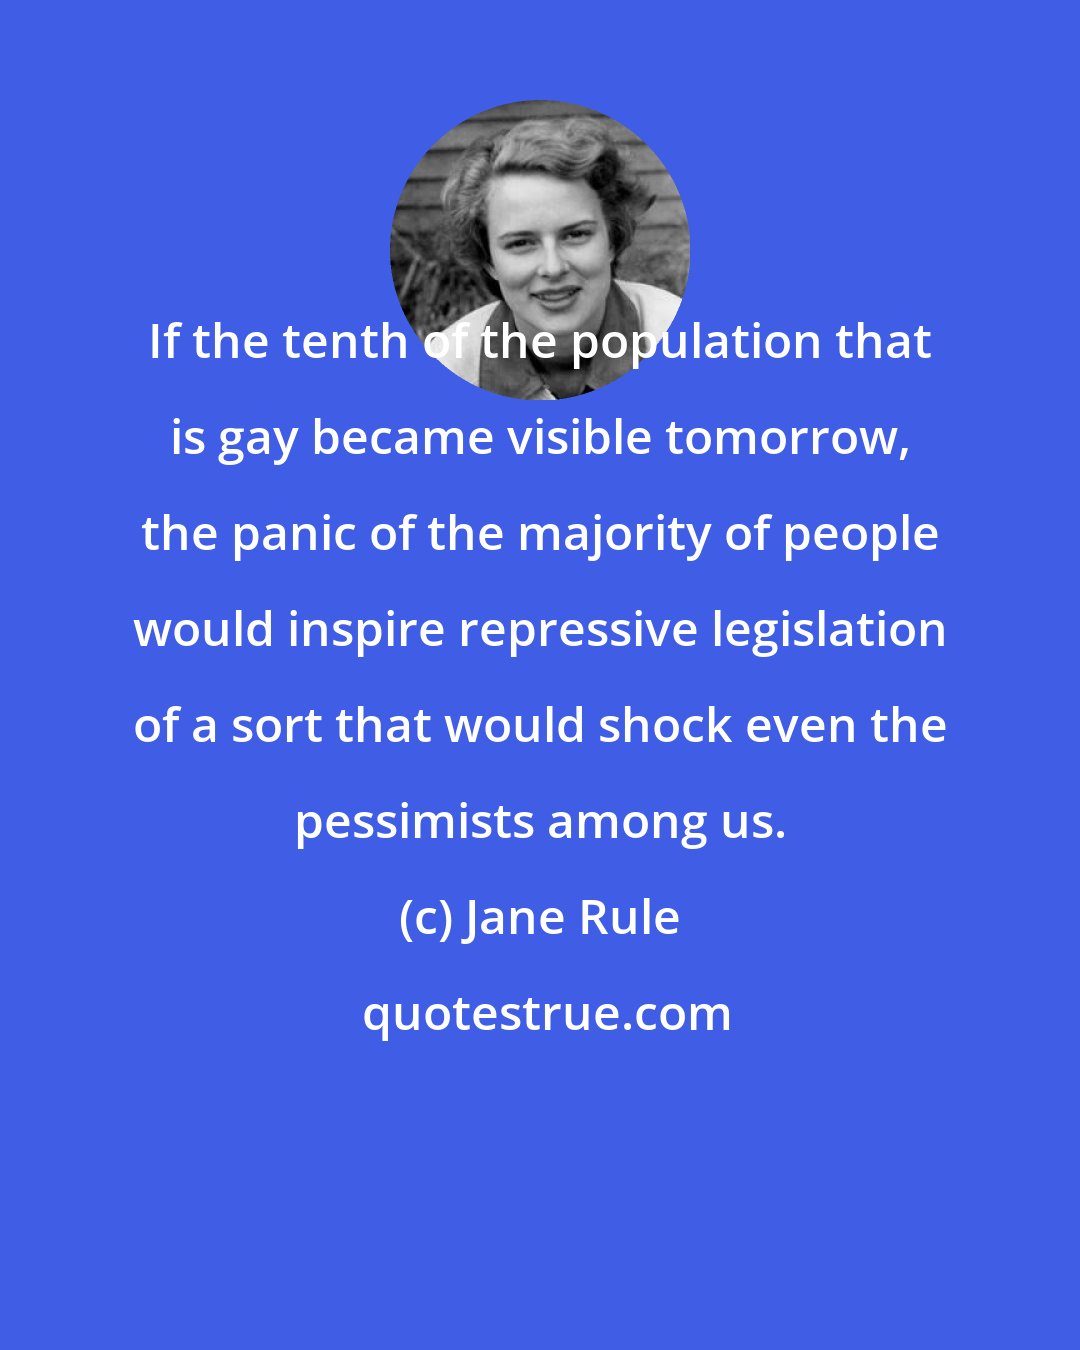 Jane Rule: If the tenth of the population that is gay became visible tomorrow, the panic of the majority of people would inspire repressive legislation of a sort that would shock even the pessimists among us.